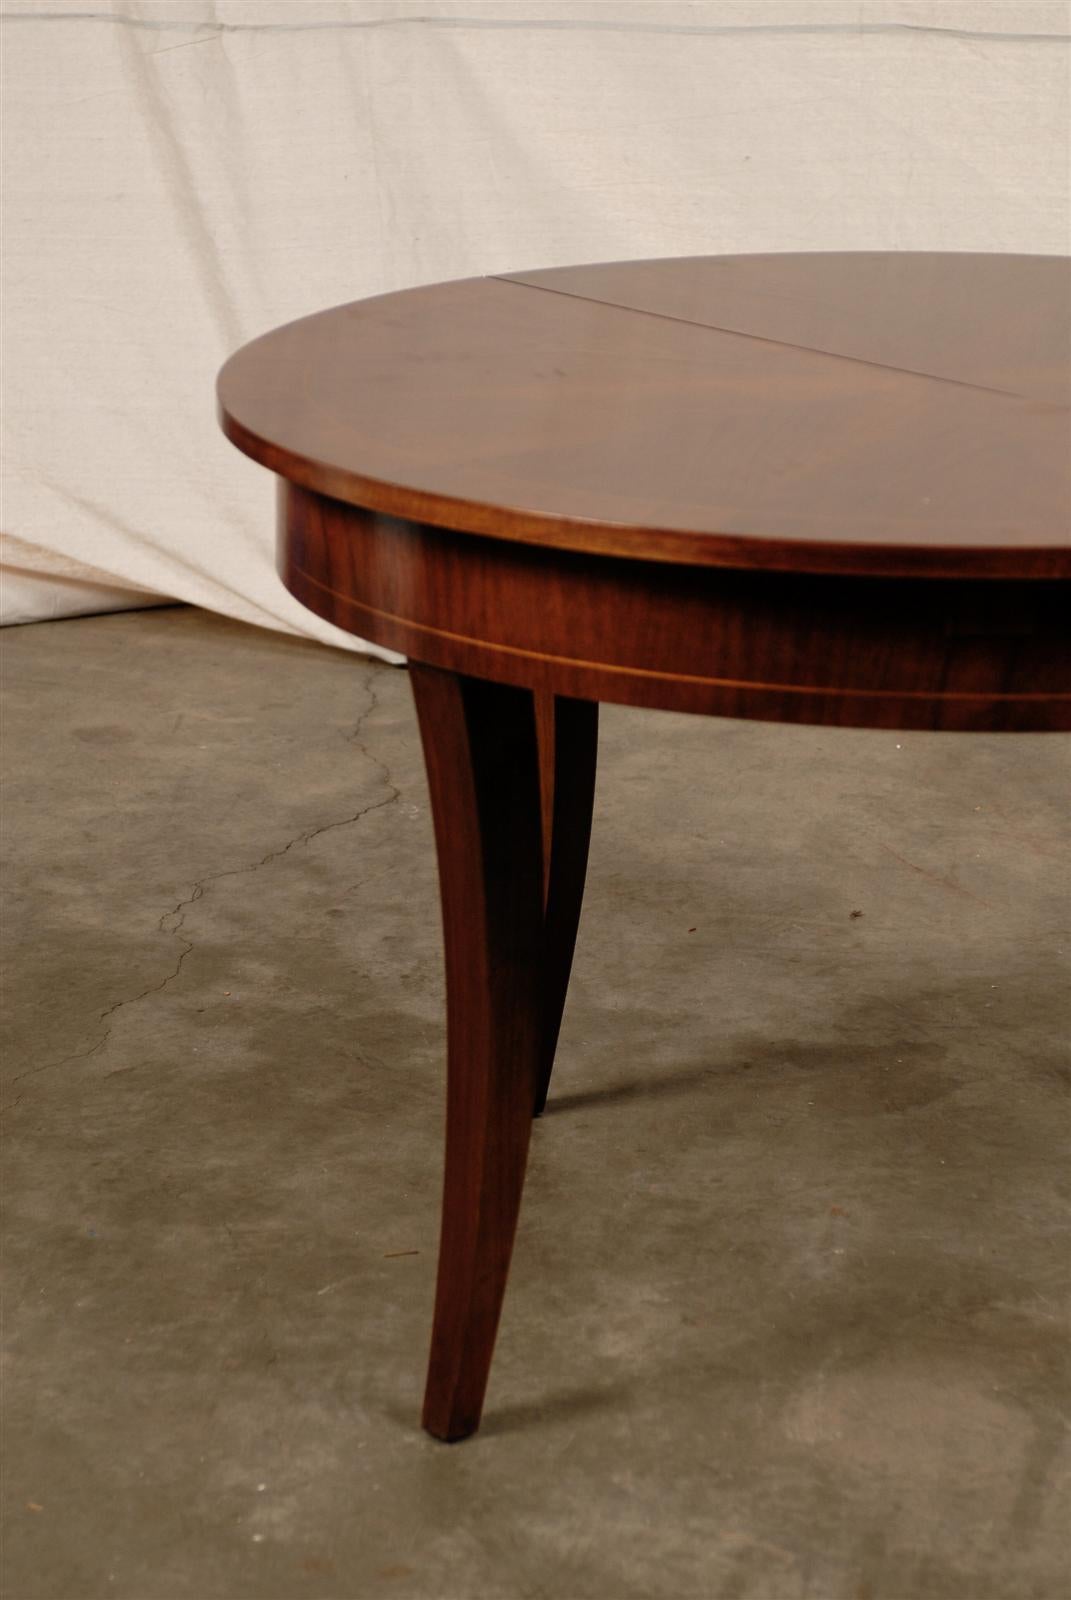 Late 19th/Early 20th Century Austrian Style Round Walnut Extension Dining Table with Starburst Top. 
Beautiful Patina, String Inlay. Very functional. Elegant and Simple Lines 
Made in Austria paper label